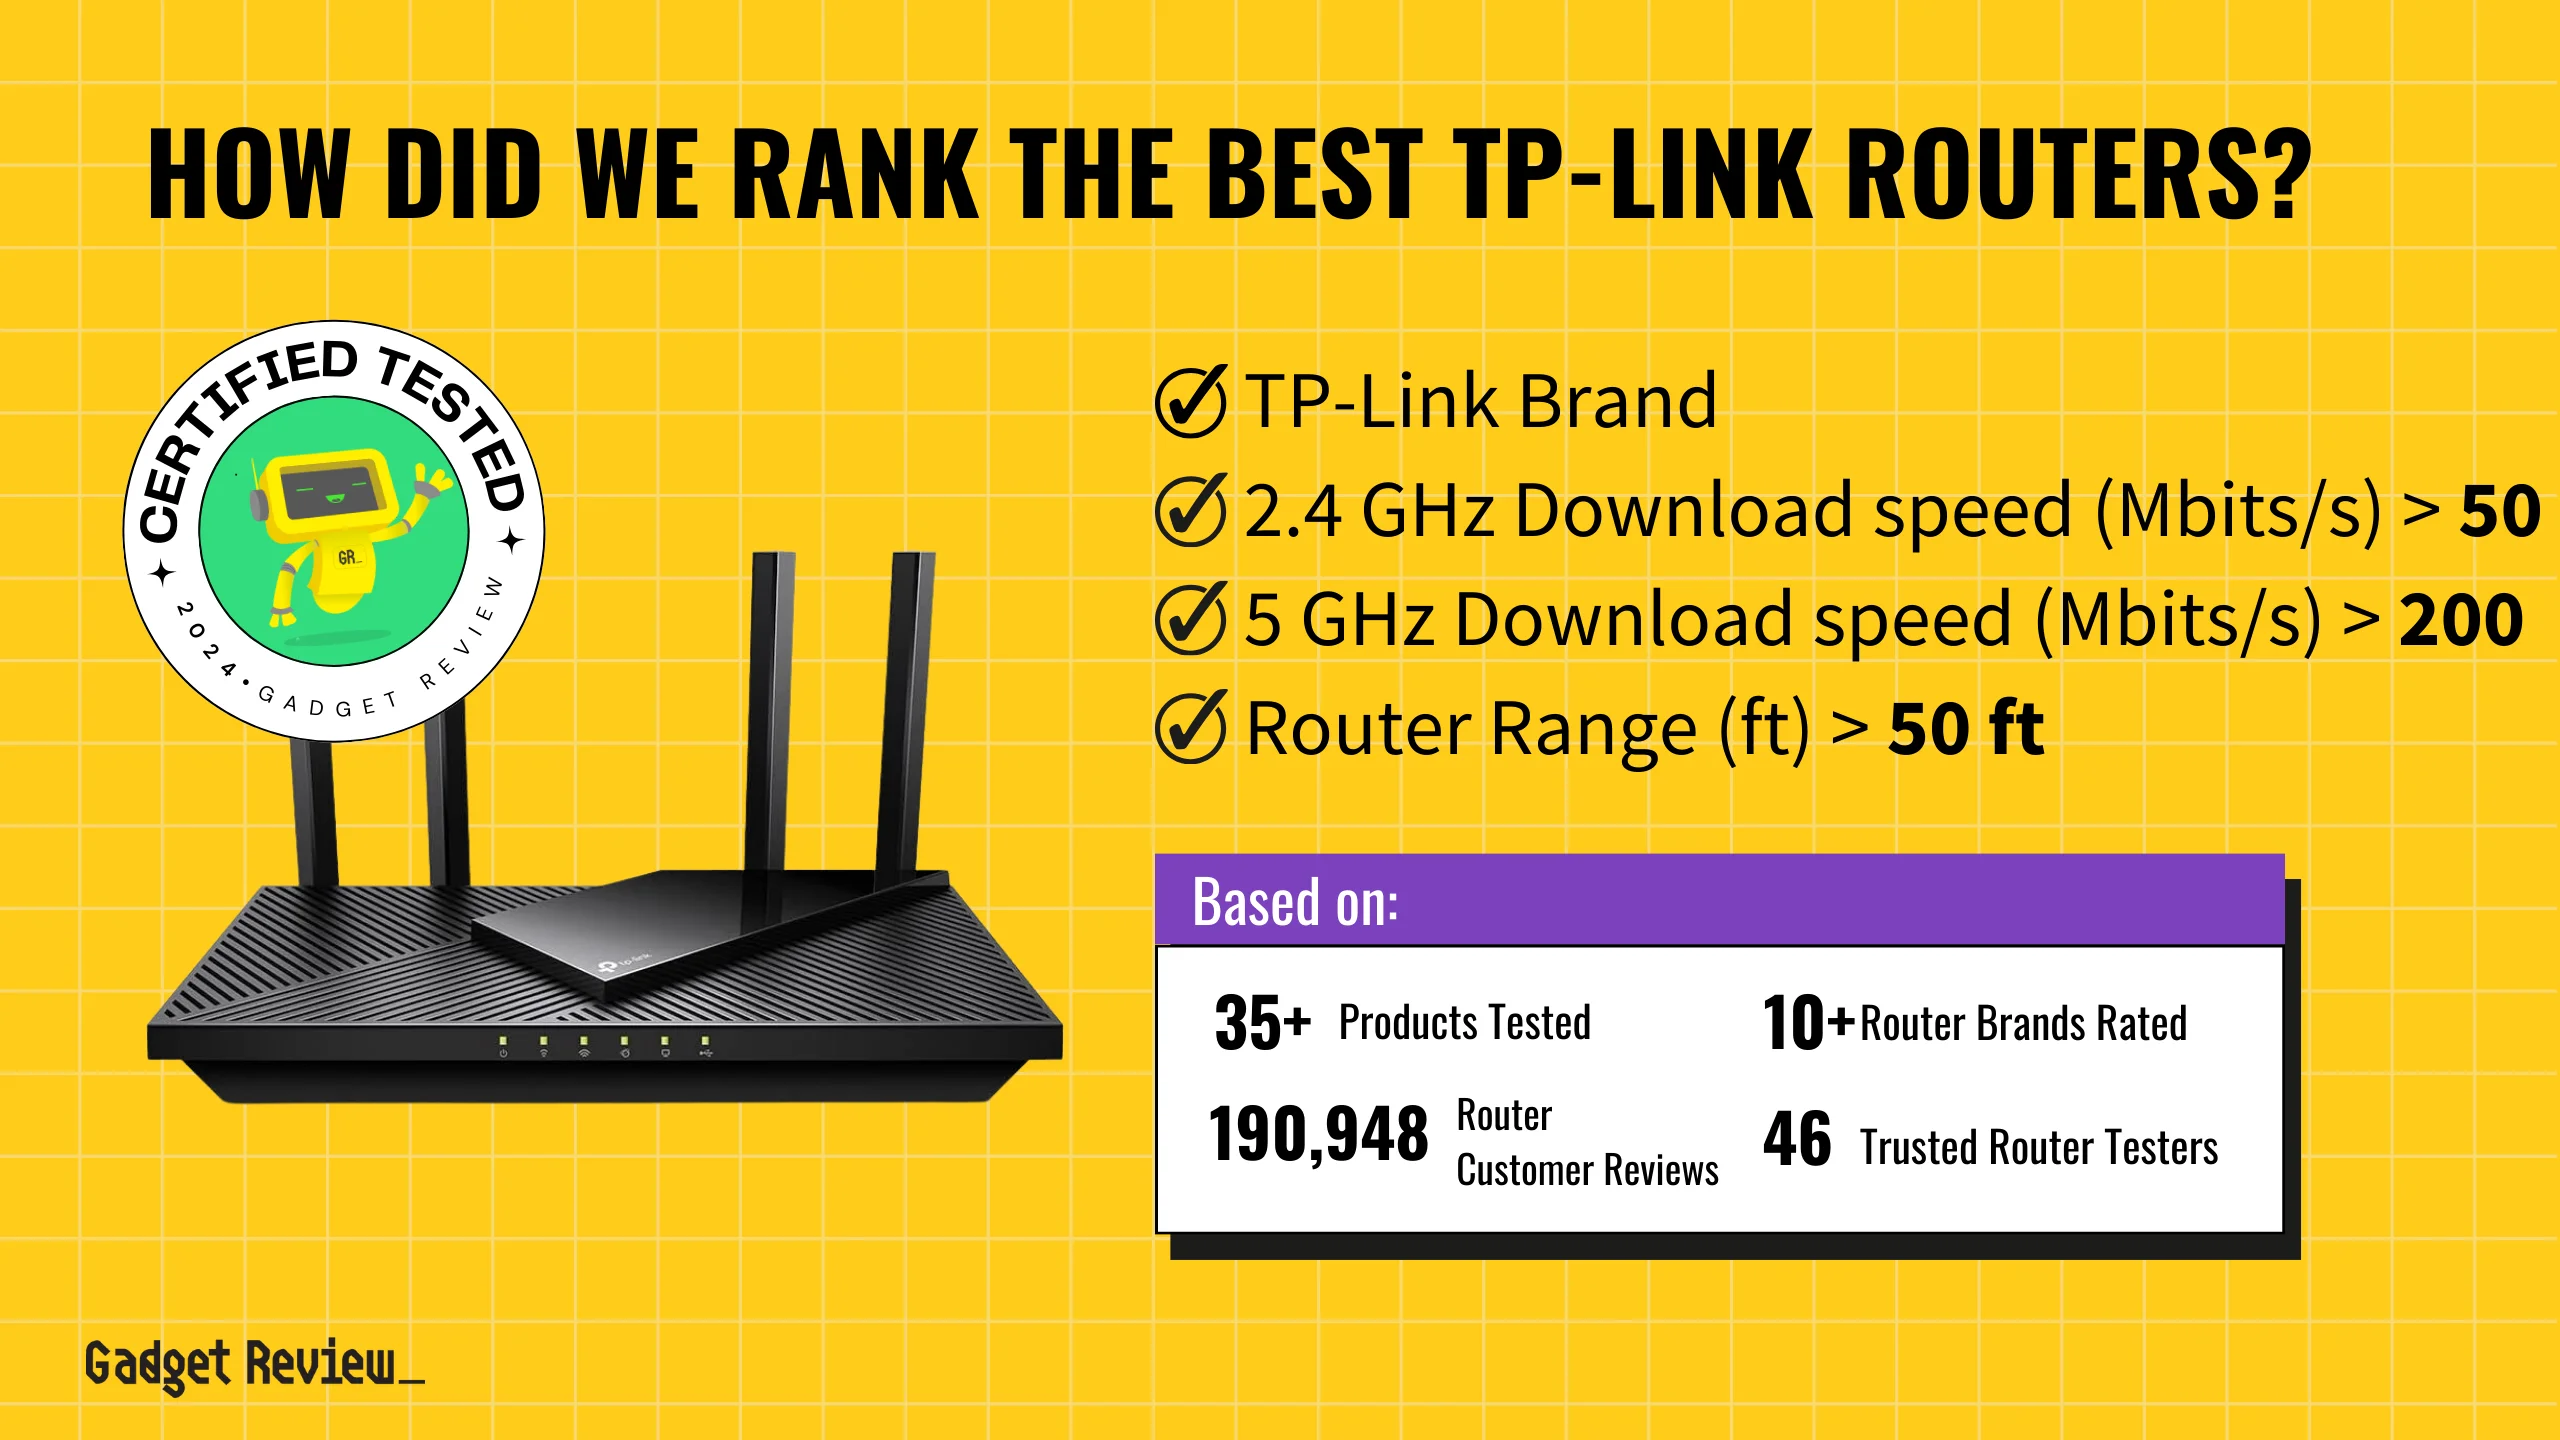 What are the Top 3 TP-Link Routers?